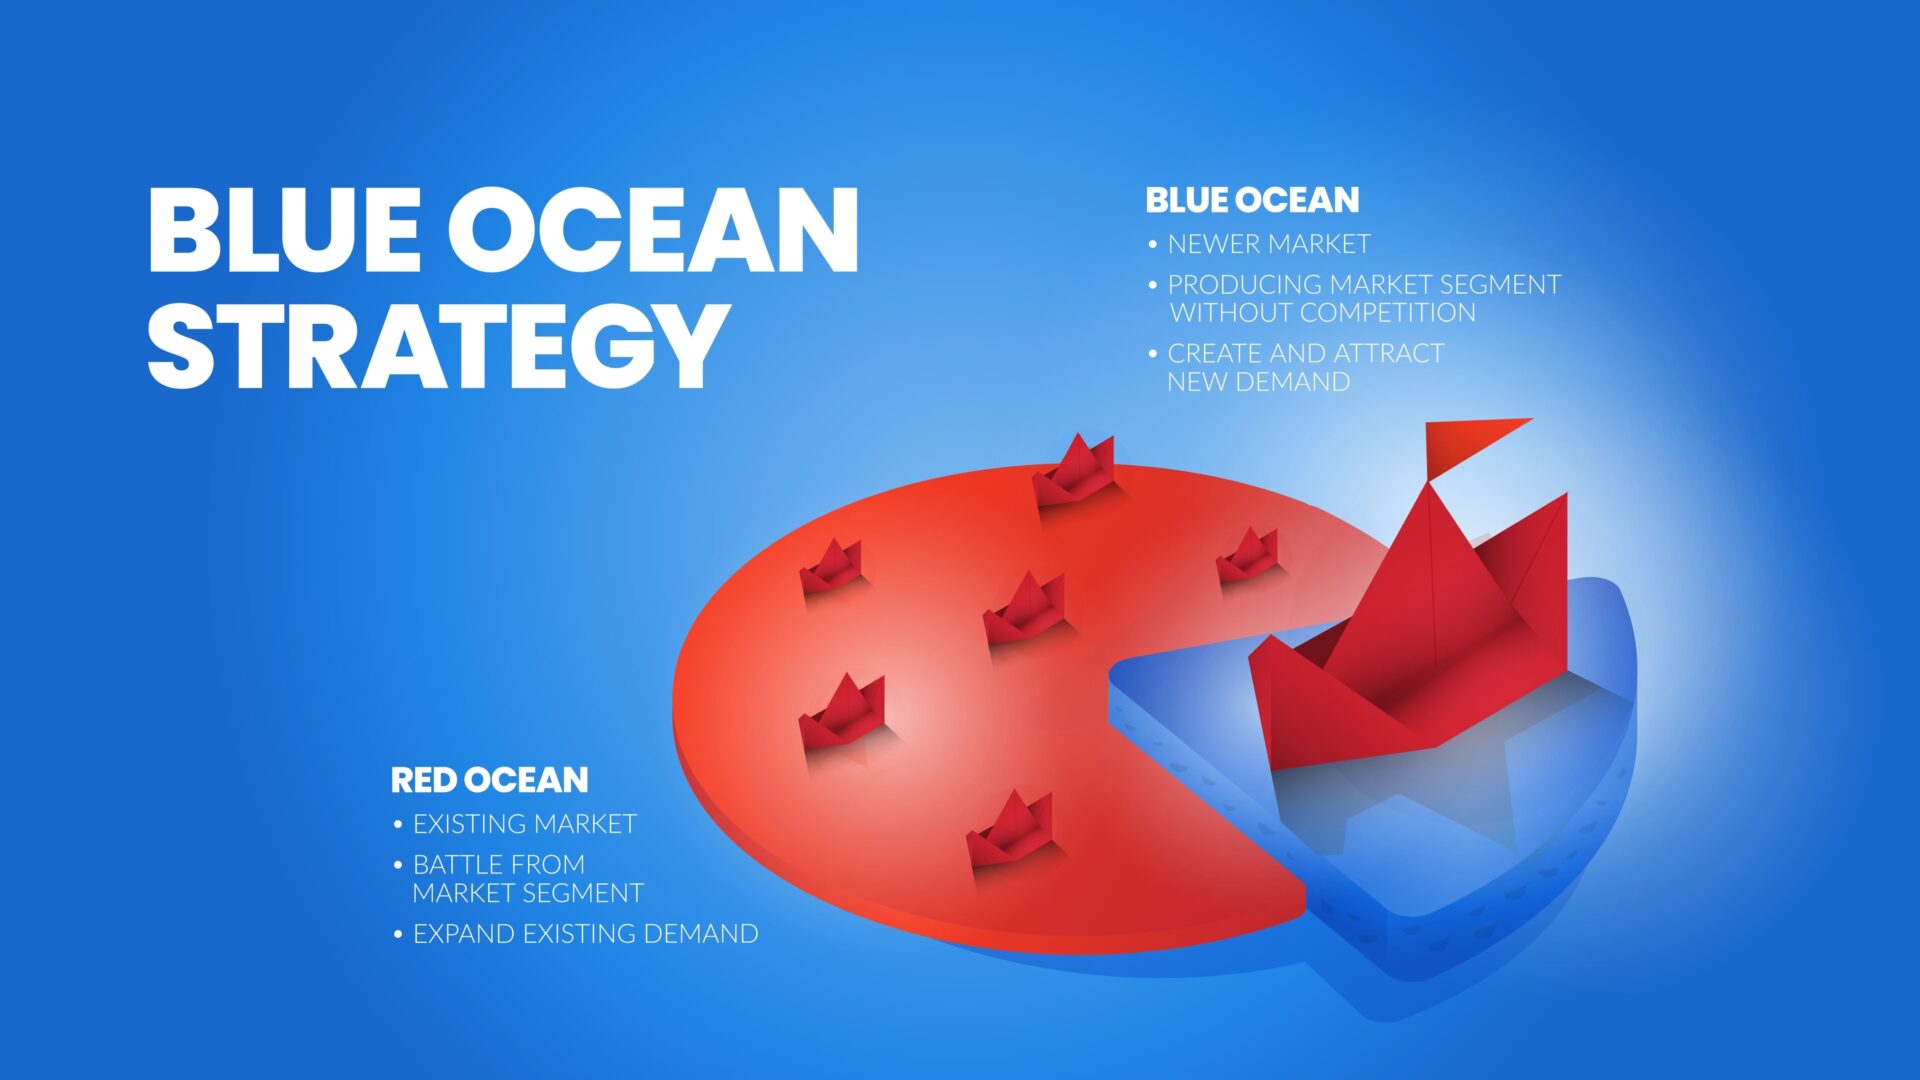 Graphic illustrating Blue Ocean Strategy. A Blue Ocean is a newer market segment without competition, allowing business to create and attract new demand. A Red Ocean is an existing market where you battle for the current segment and have to try to expand existing demand.